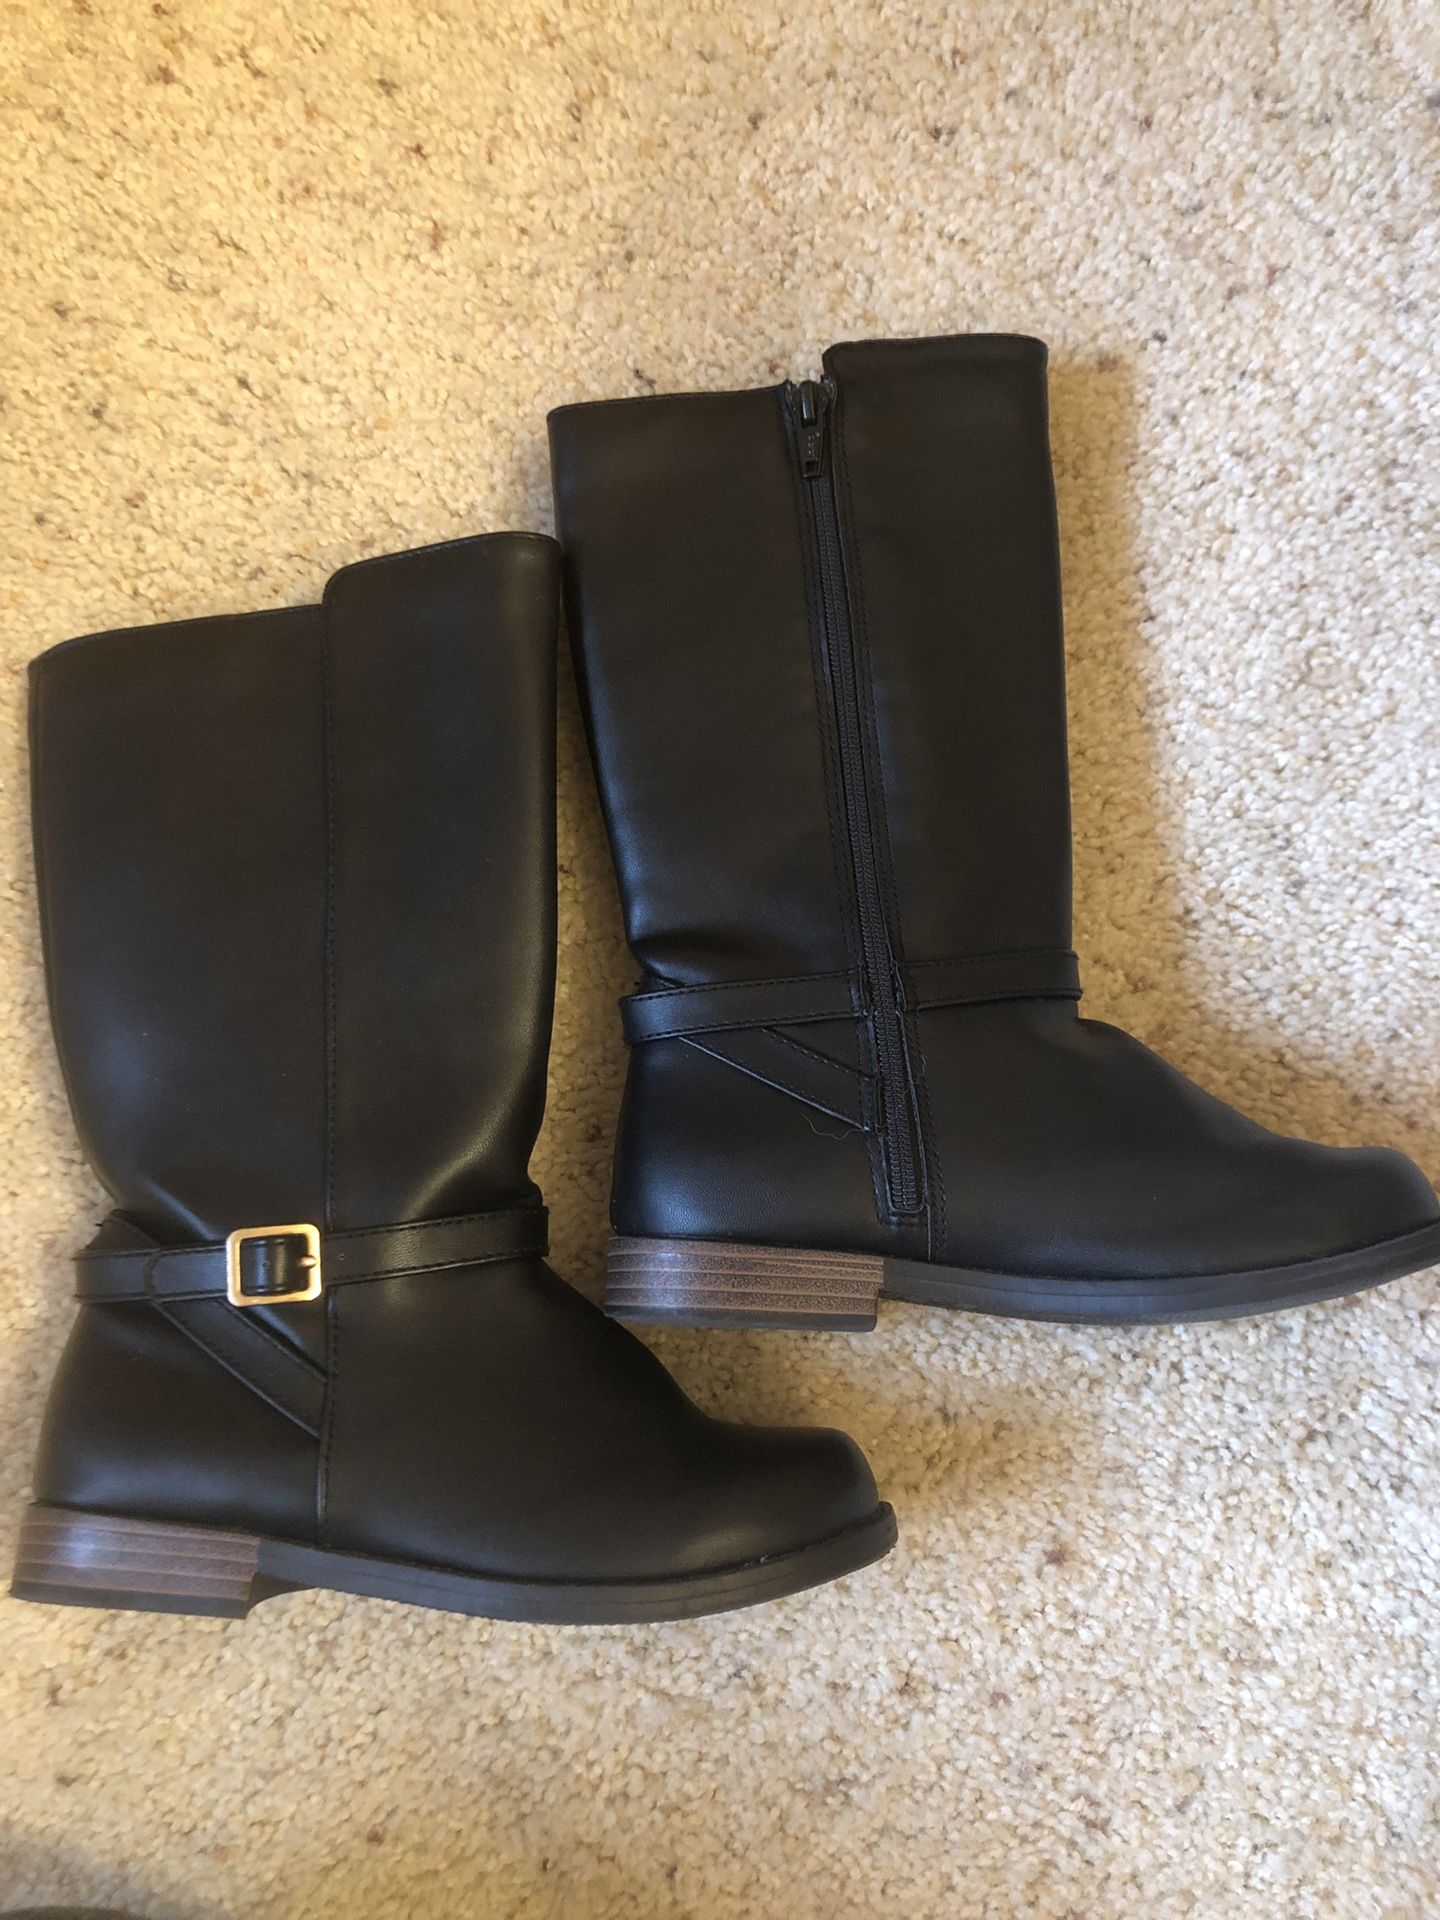 Gymboree Tall Black Boot Girl Size 13 Worn Once!